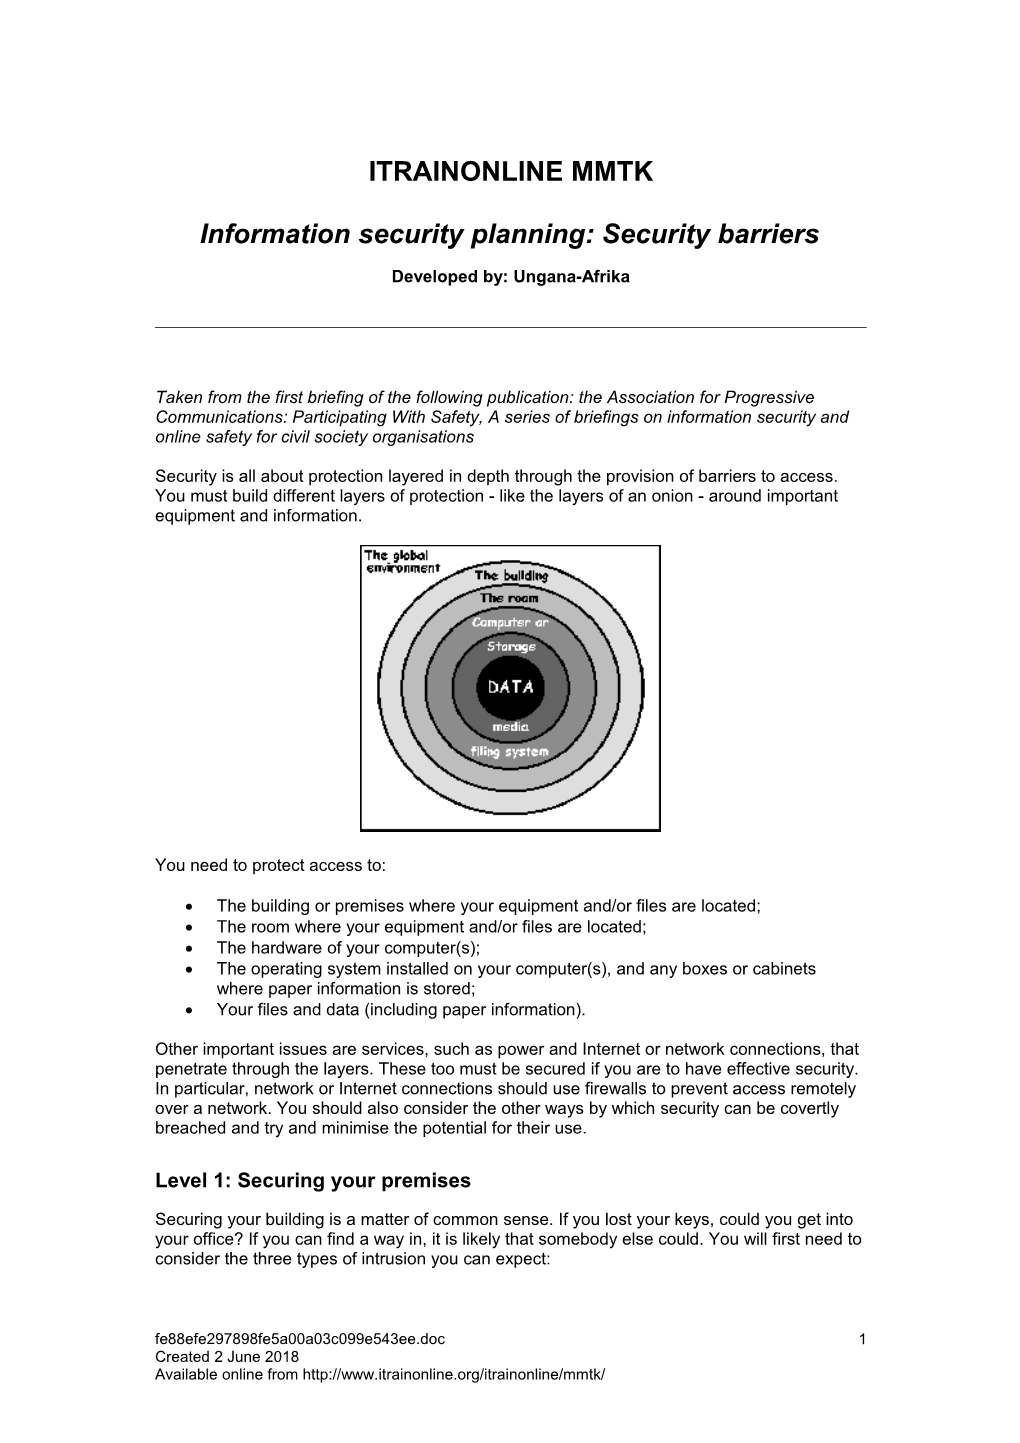 Information Security Planning: Security Barriers